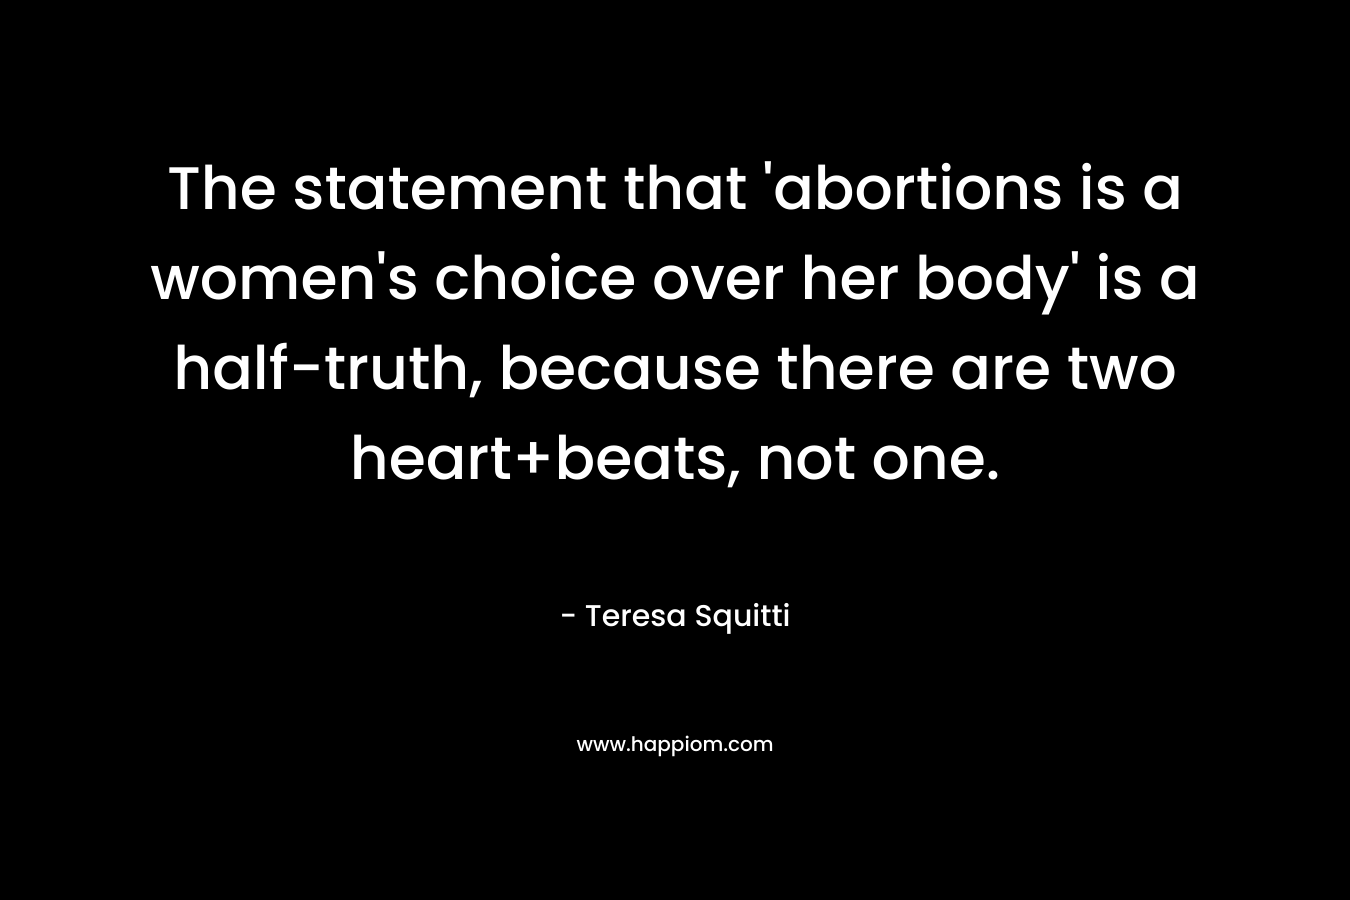 The statement that 'abortions is a women's choice over her body' is a half-truth, because there are two heart+beats, not one.